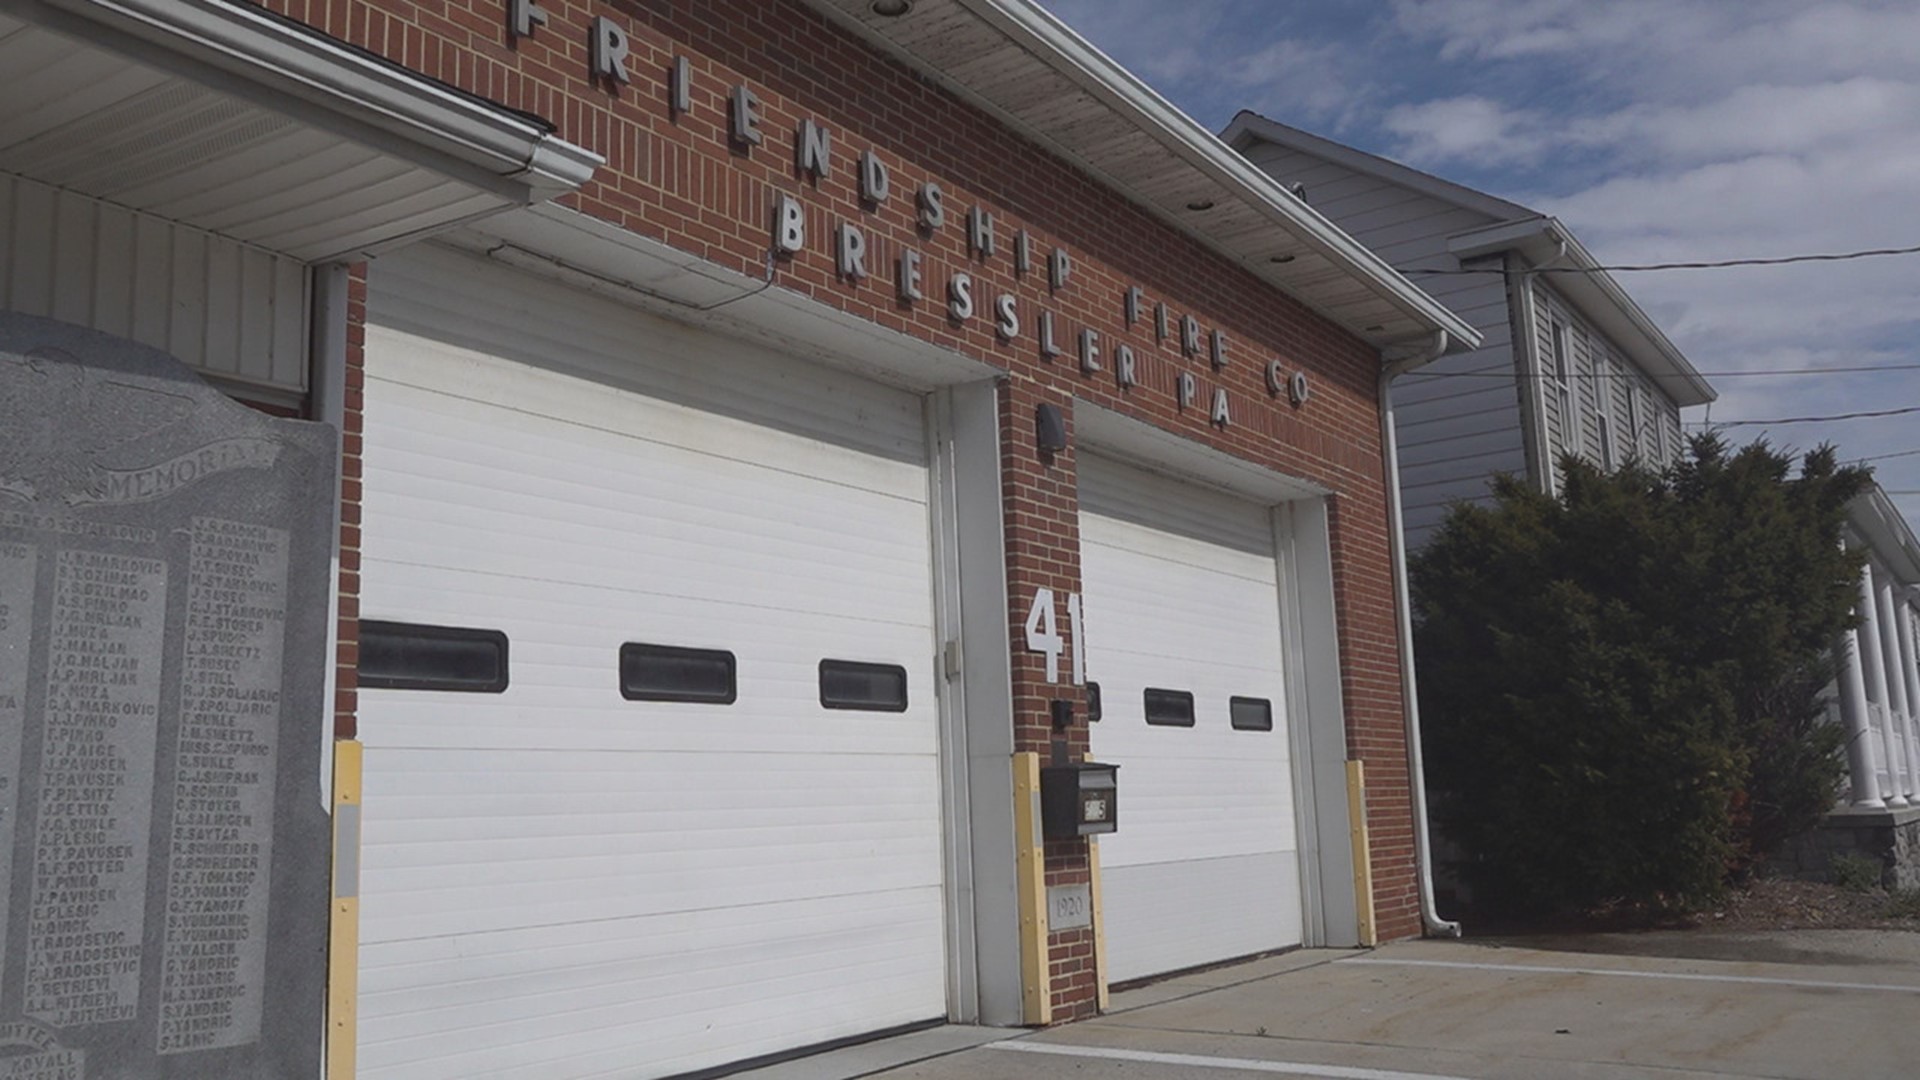 The Friendship Fire Company of Bressler was suspended following a recent complaint that alleges racial discrimination at the company's affiliated social club.